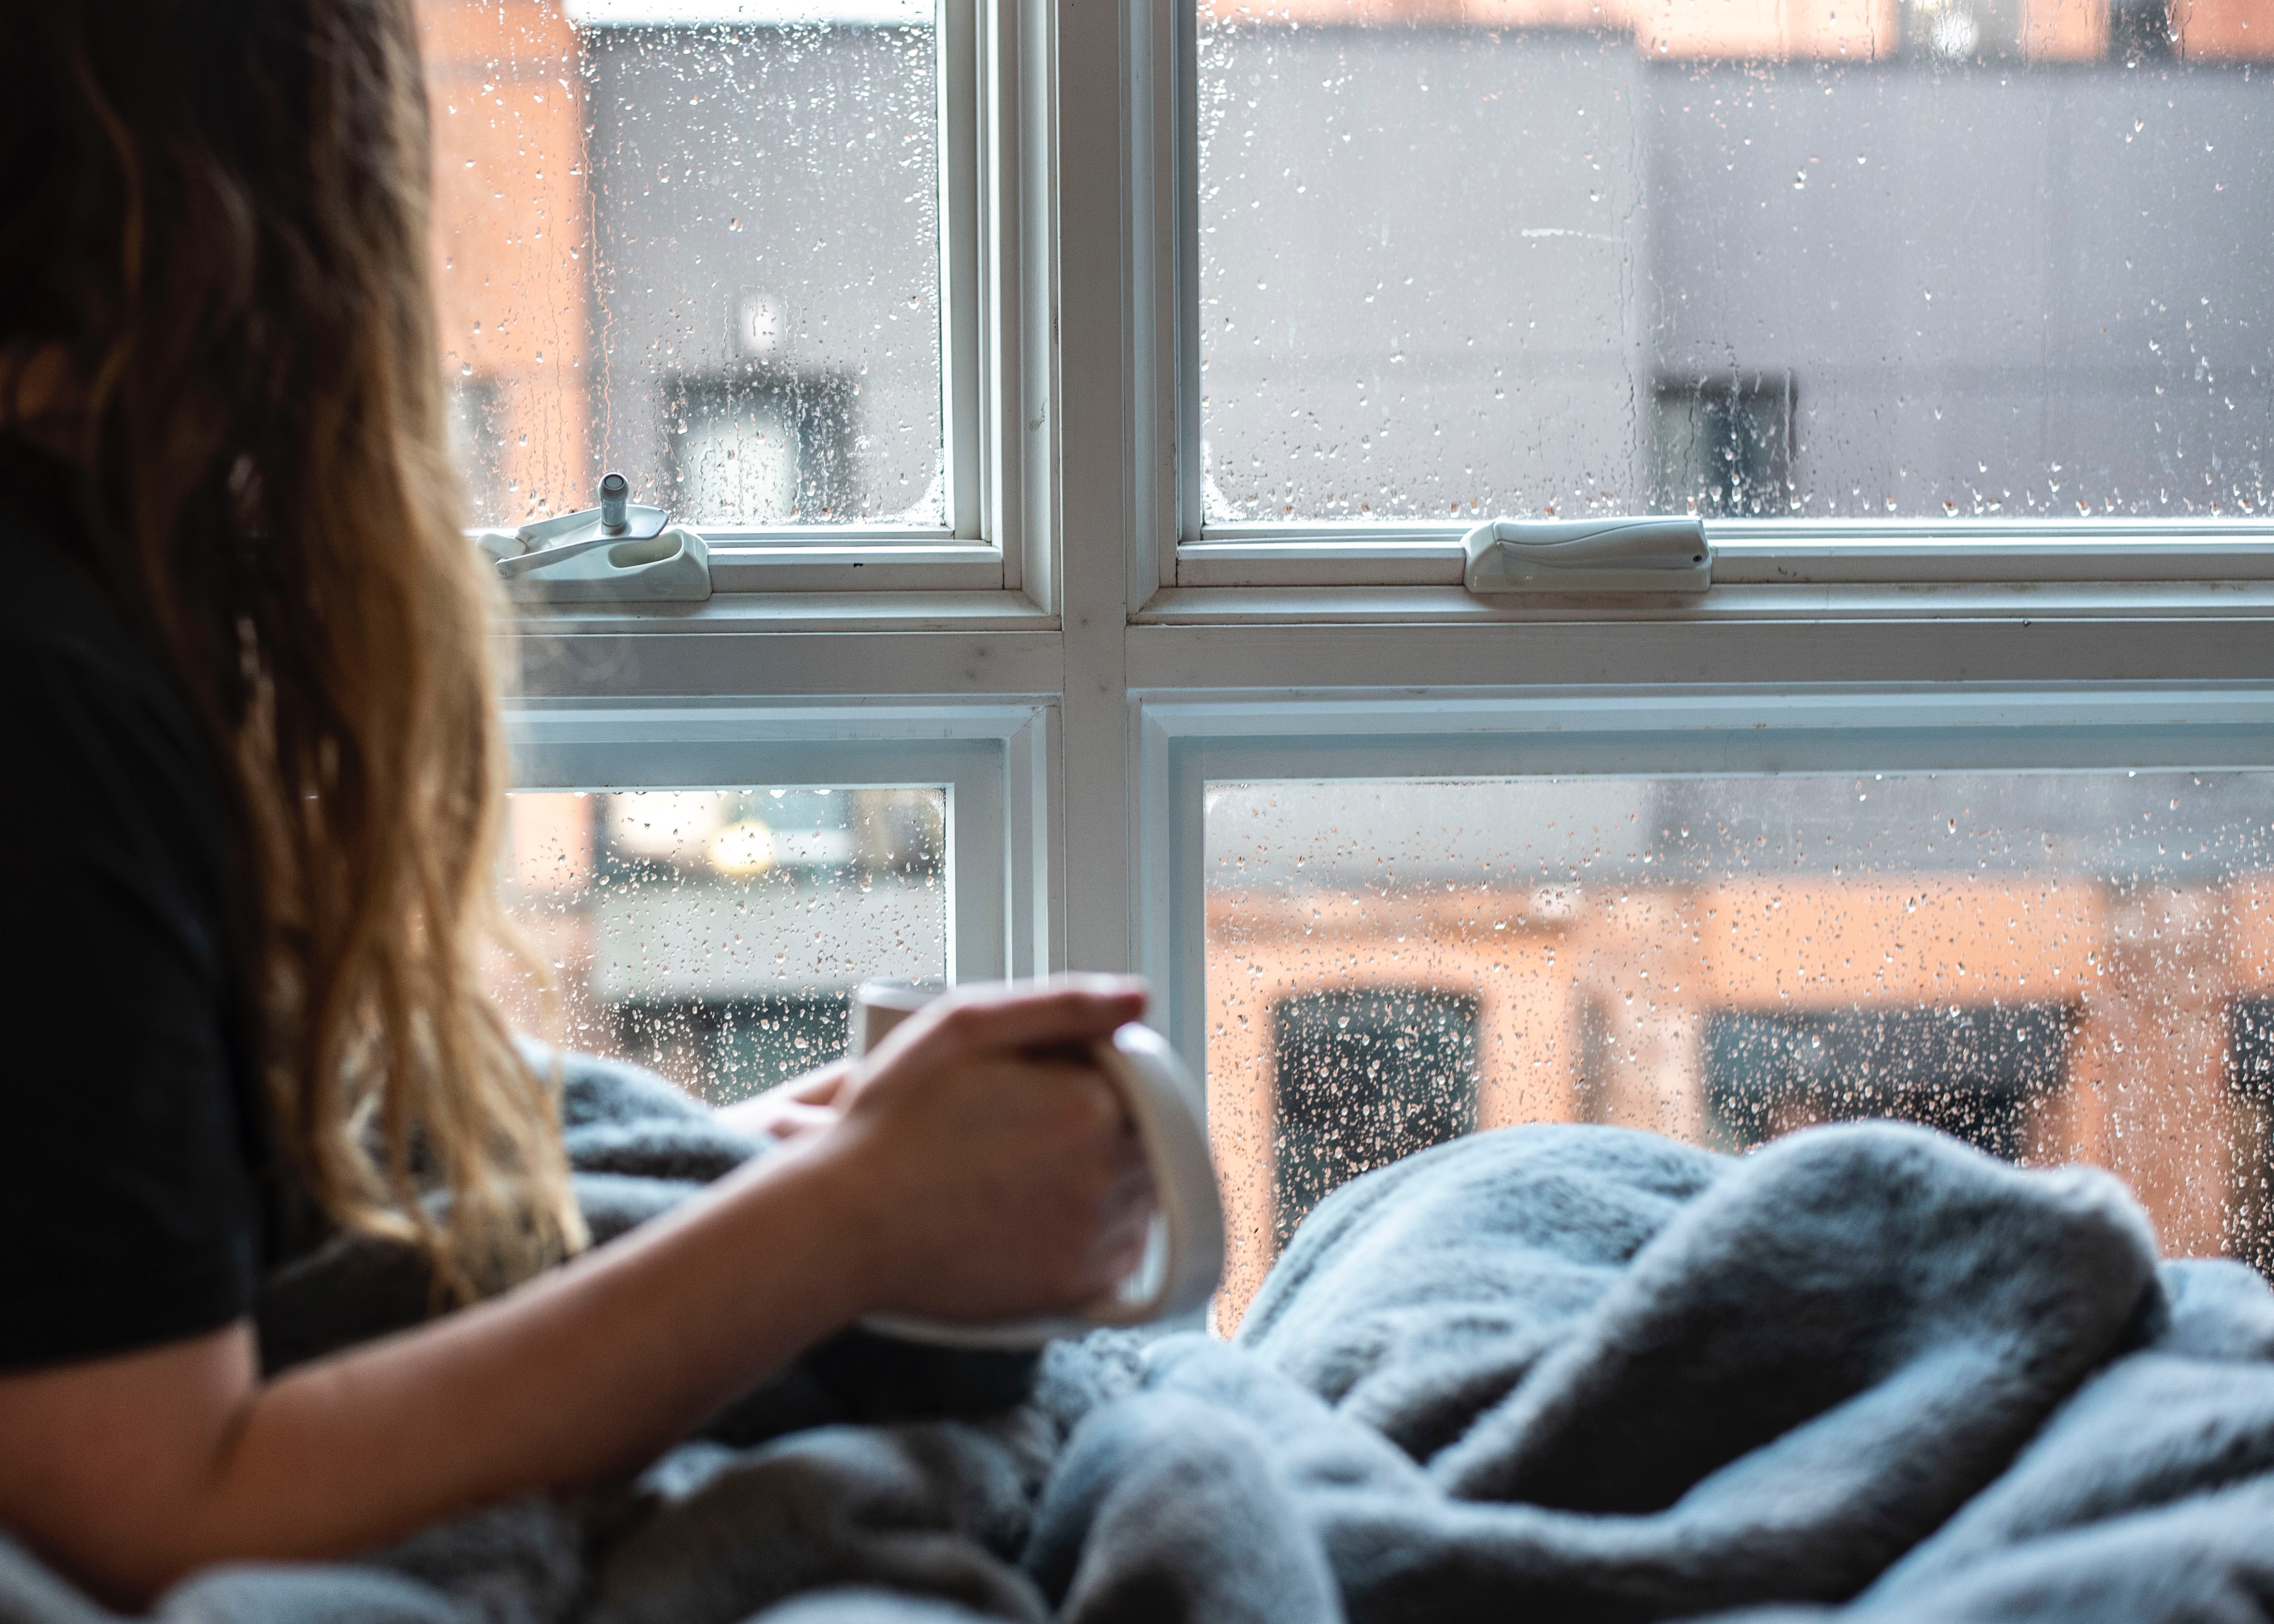 Girl sitting in bed with a mug watching cold rain outside